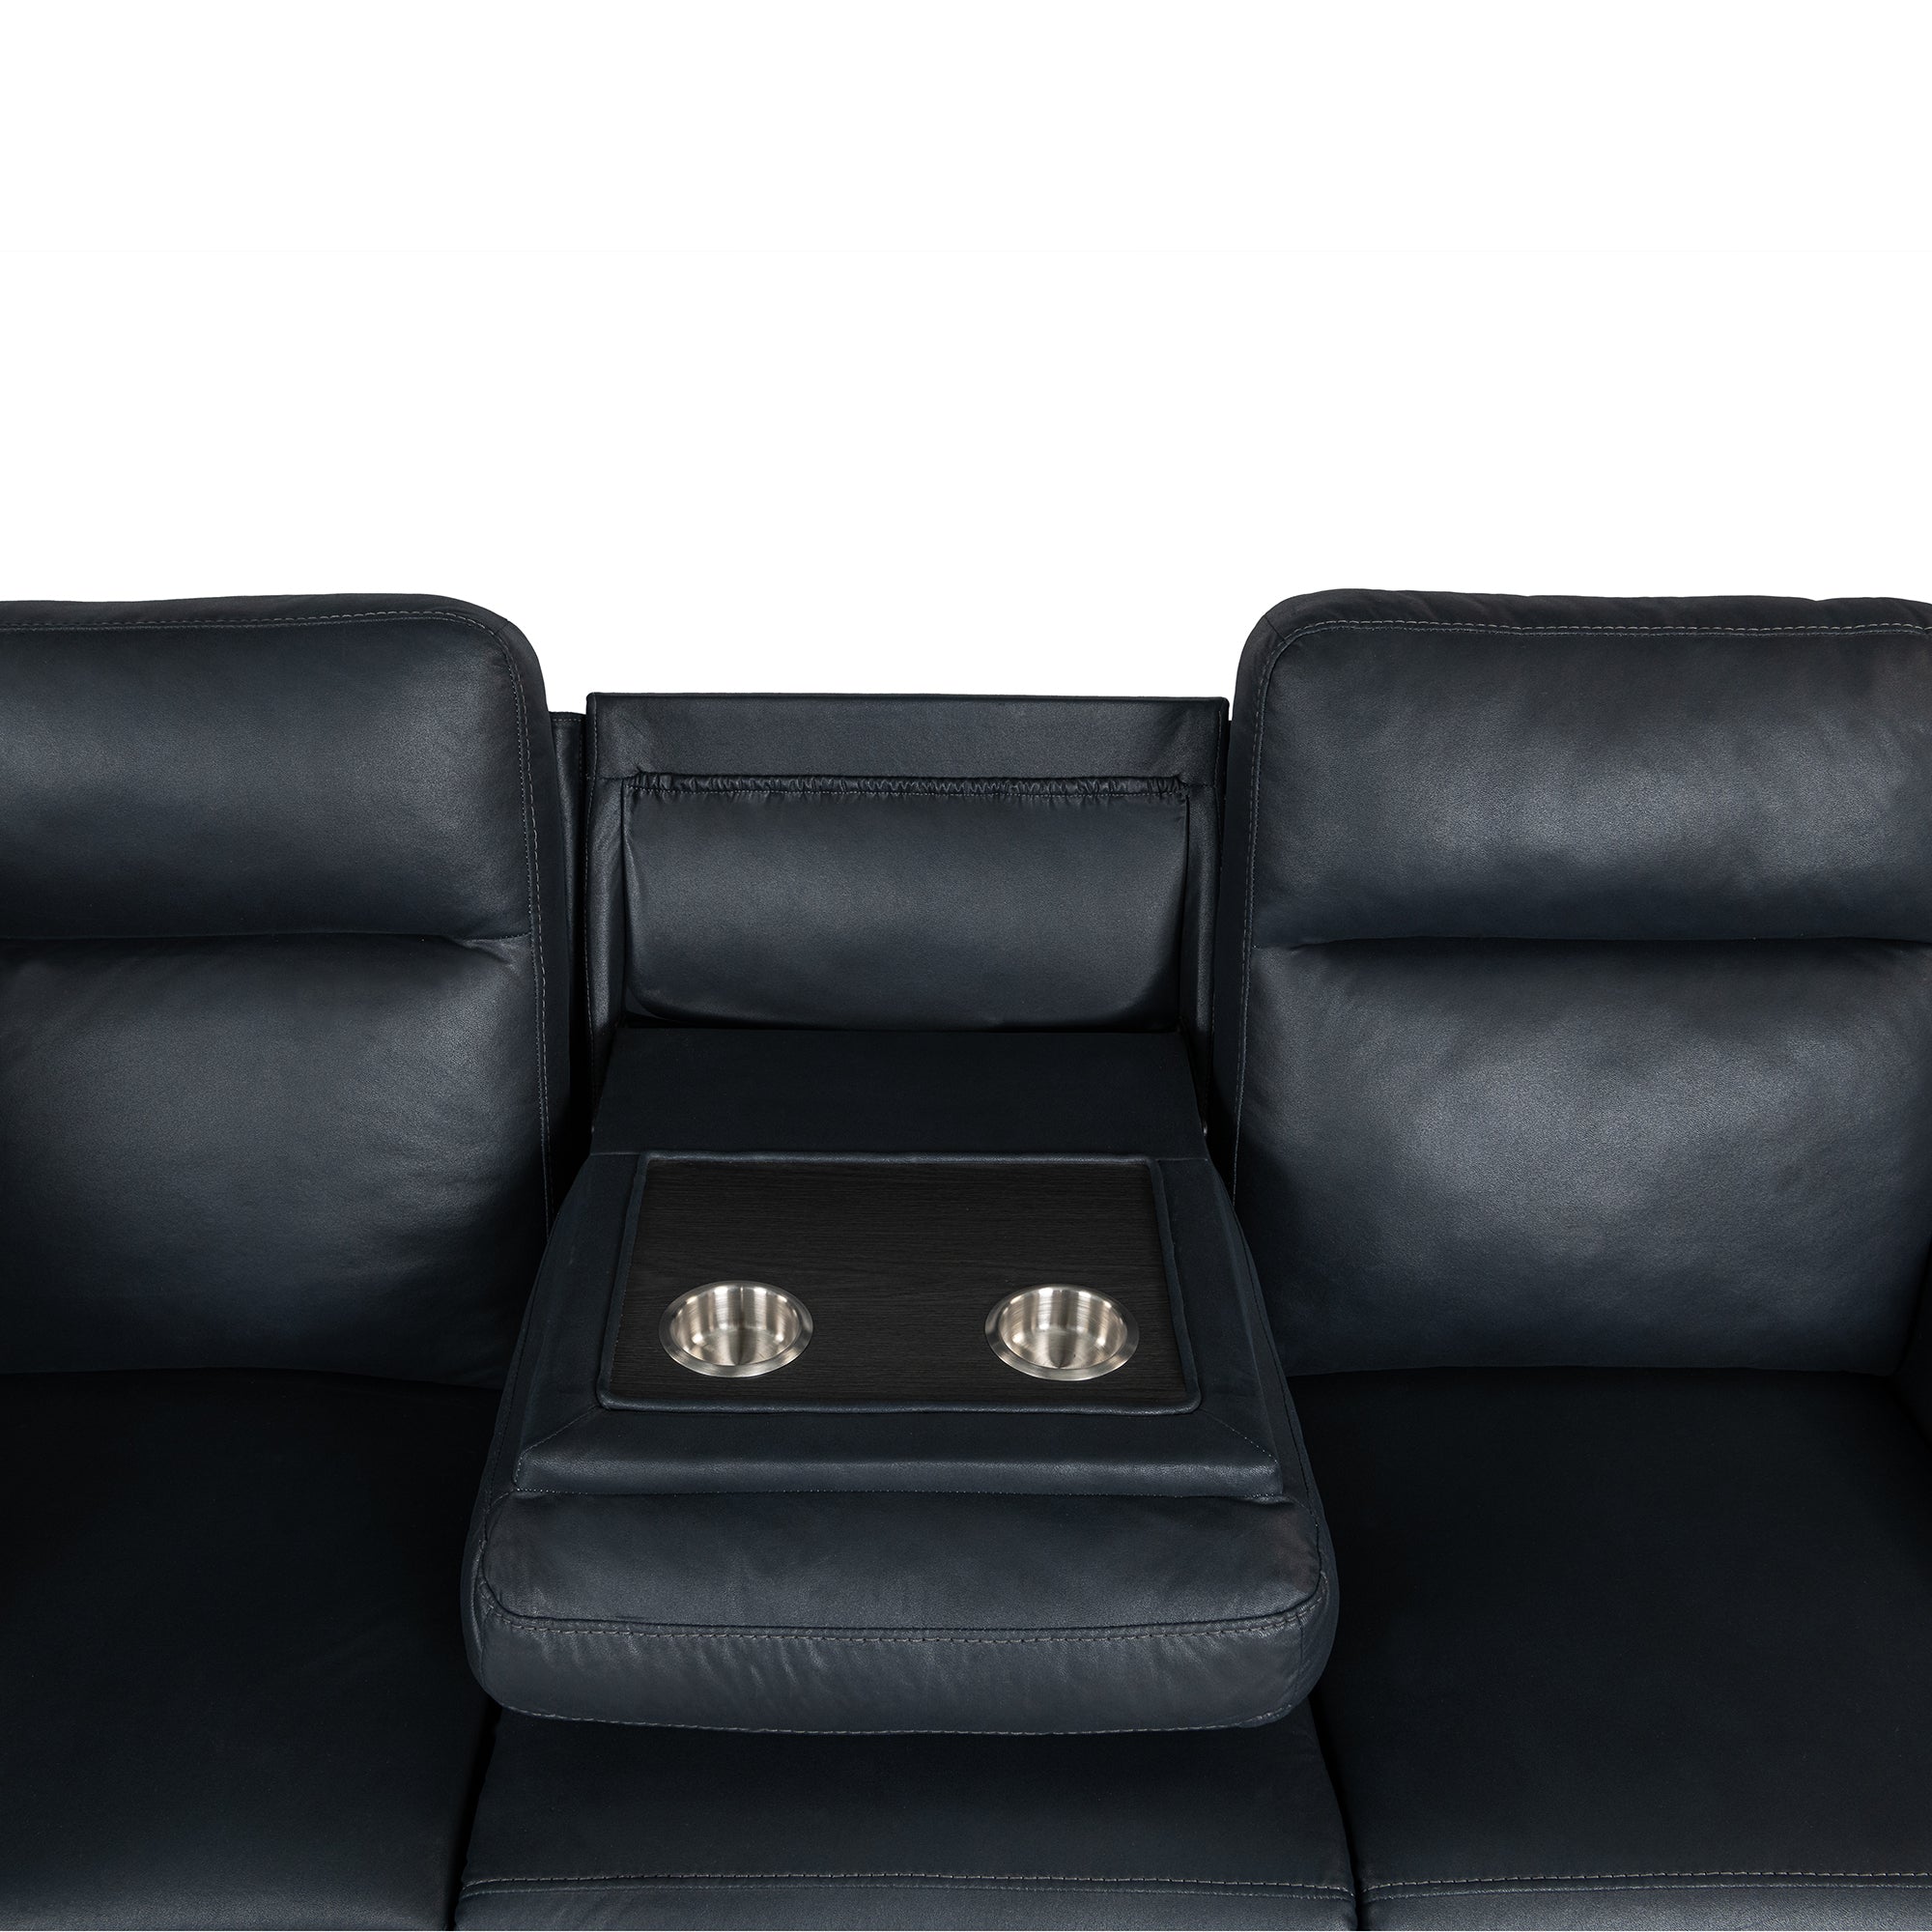 87.5" Home Theater Reclining Sectional Sofa w/ Cup Holders - Dark Blue-Reclining Sectionals-American Furniture Outlet